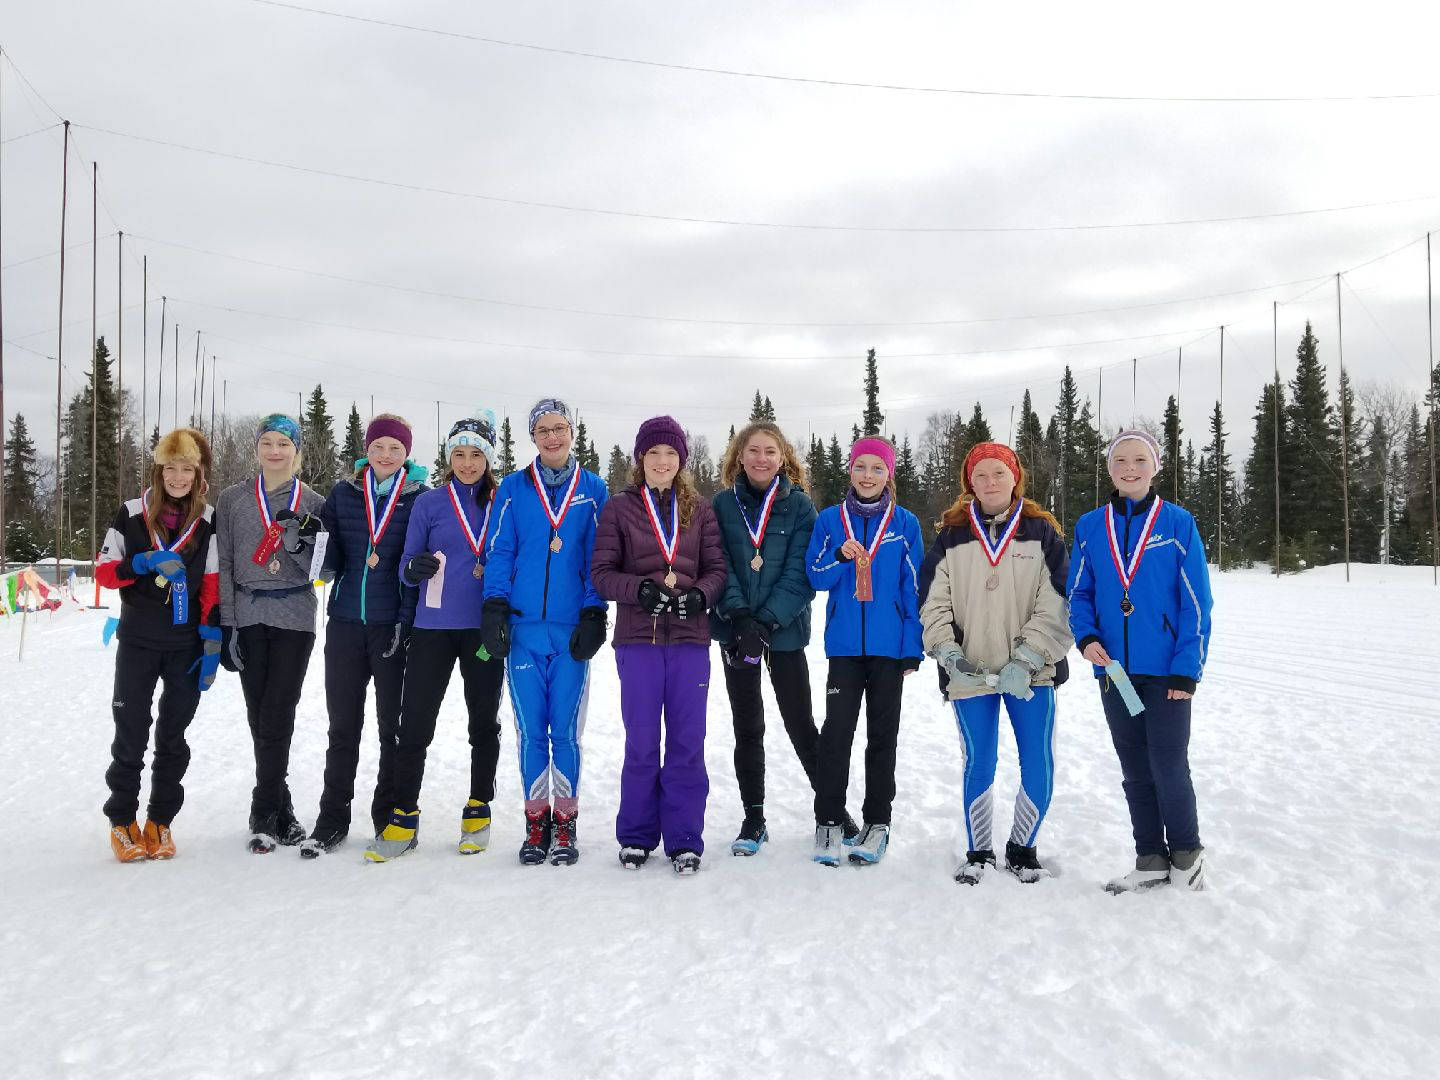 The top ten girl skiers from Homer Middle School pose for a photo at a borough-wide ski meet the weekend of March 2-3, 2019 in Kenai, Alaska. (Photo submitted)